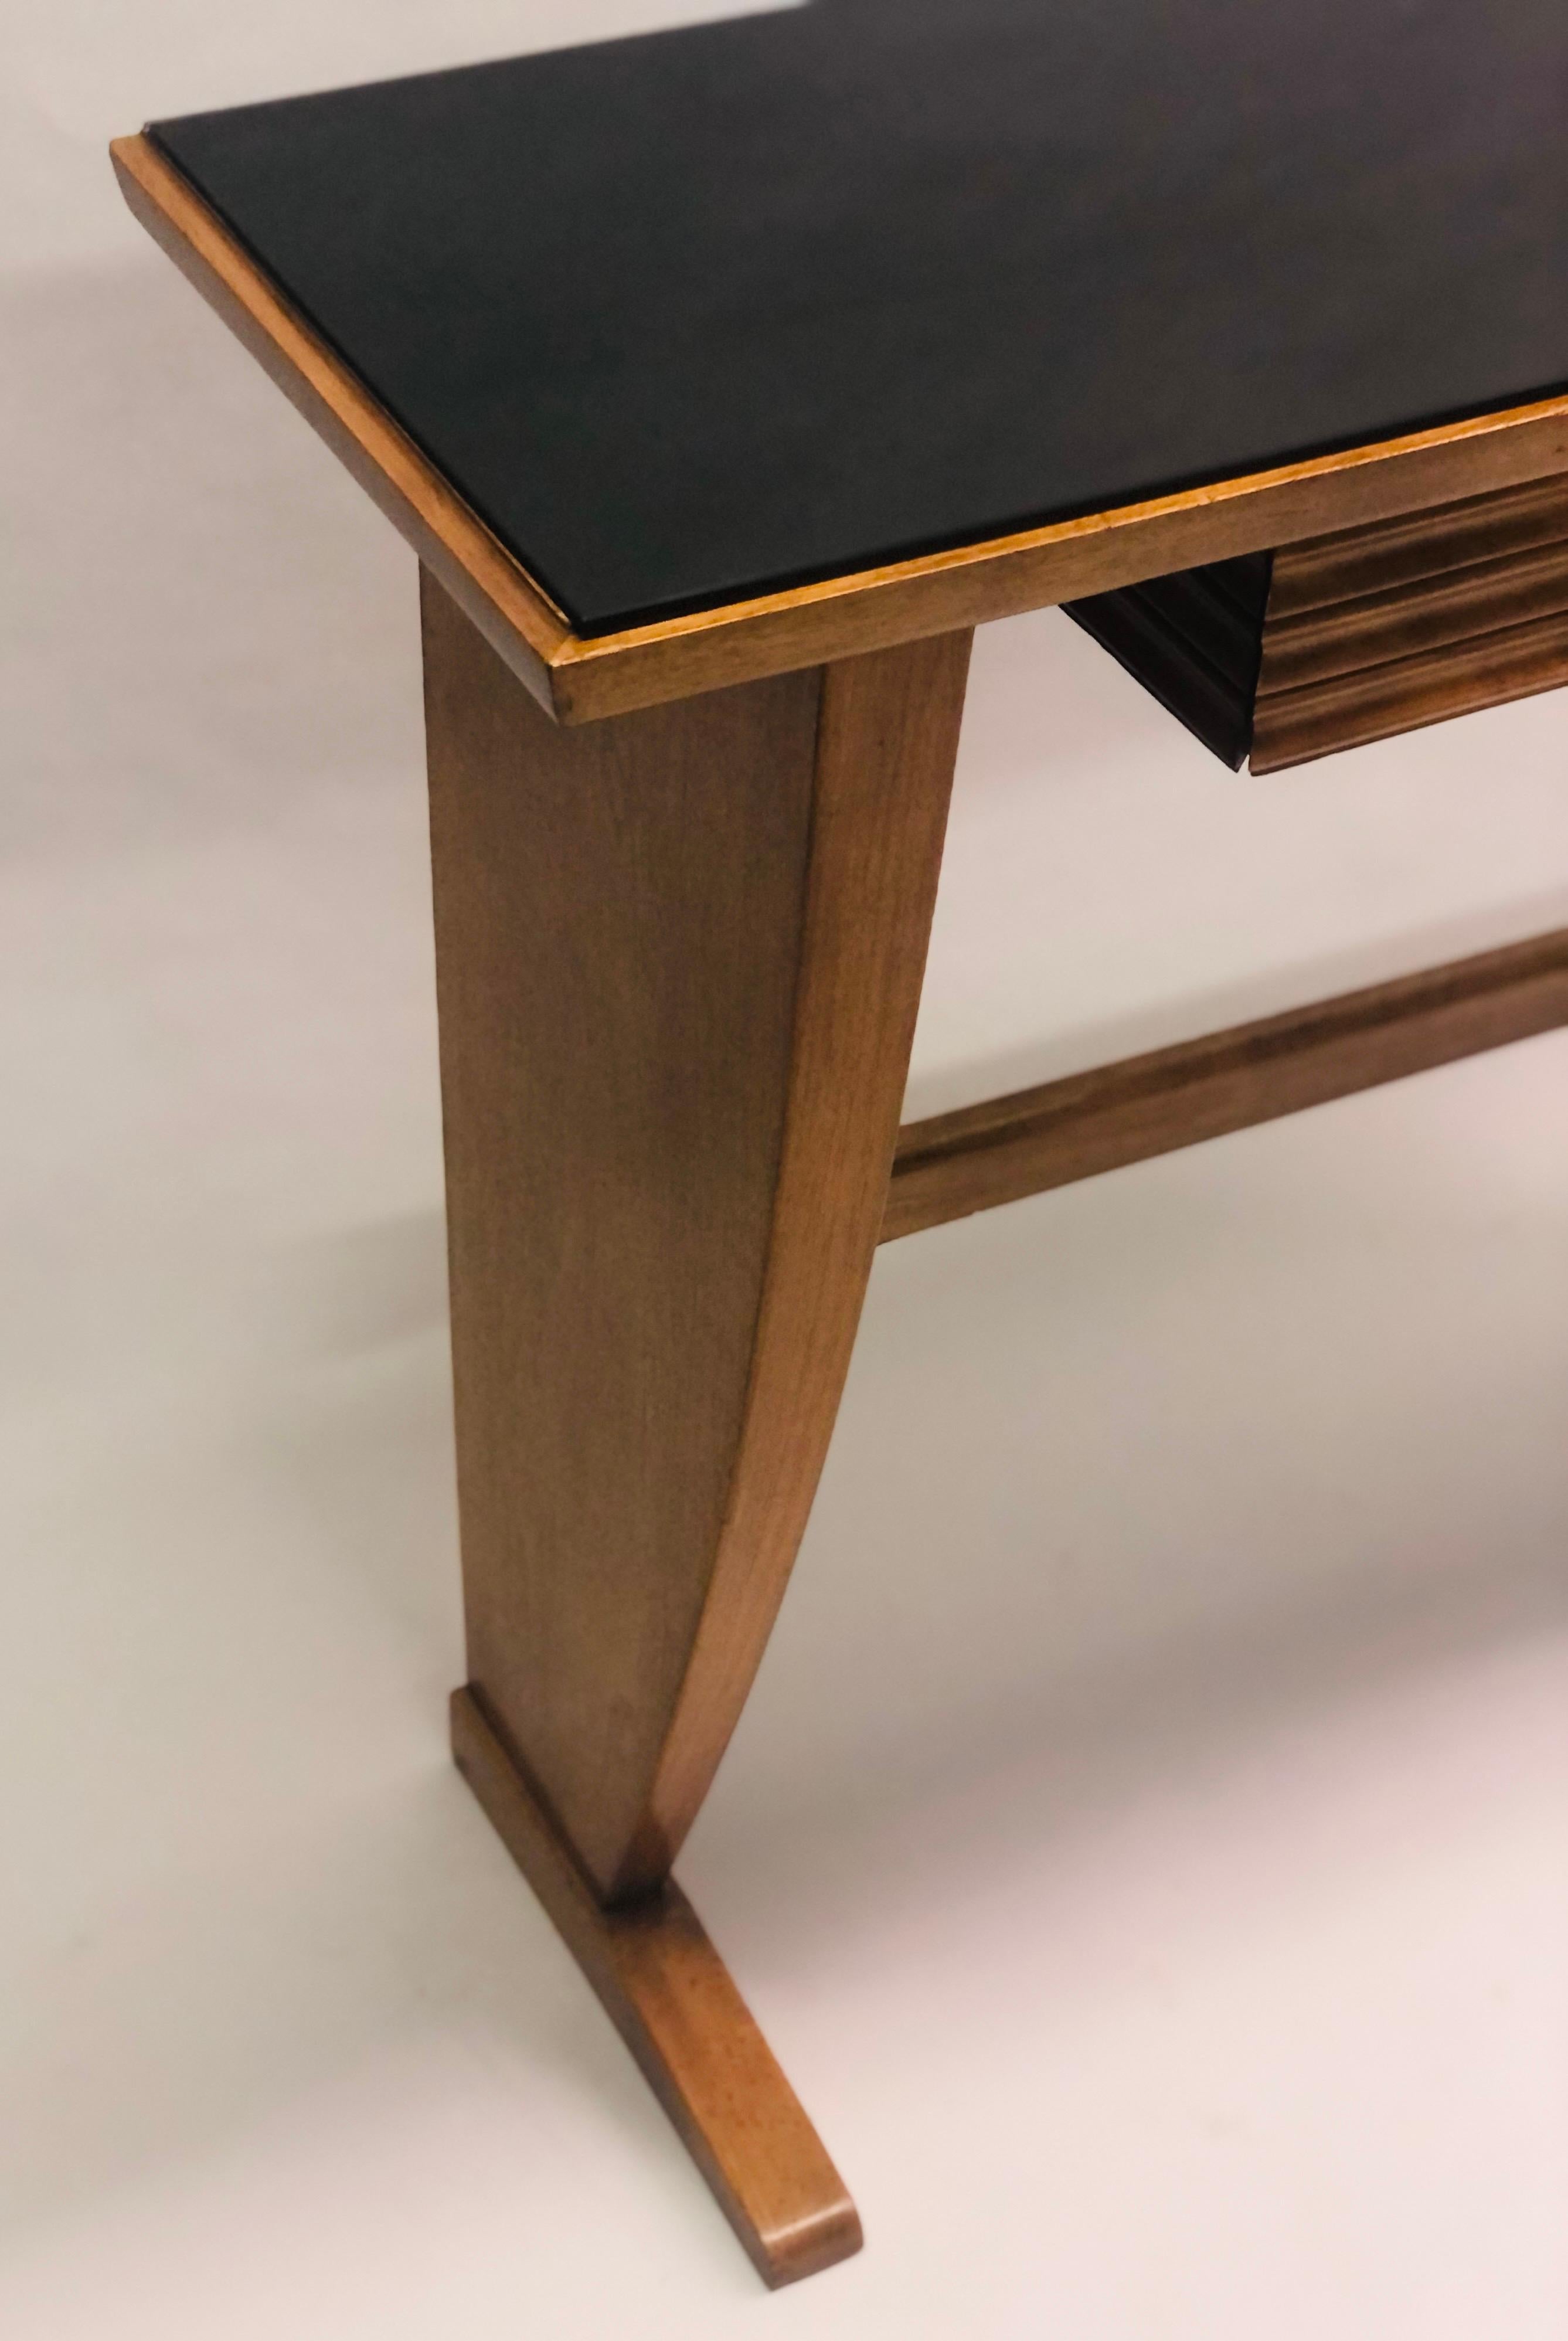 Italian Modern Neoclassical Walnut and Black Onyx Glass Console, Paolo Buffa In Good Condition For Sale In New York, NY